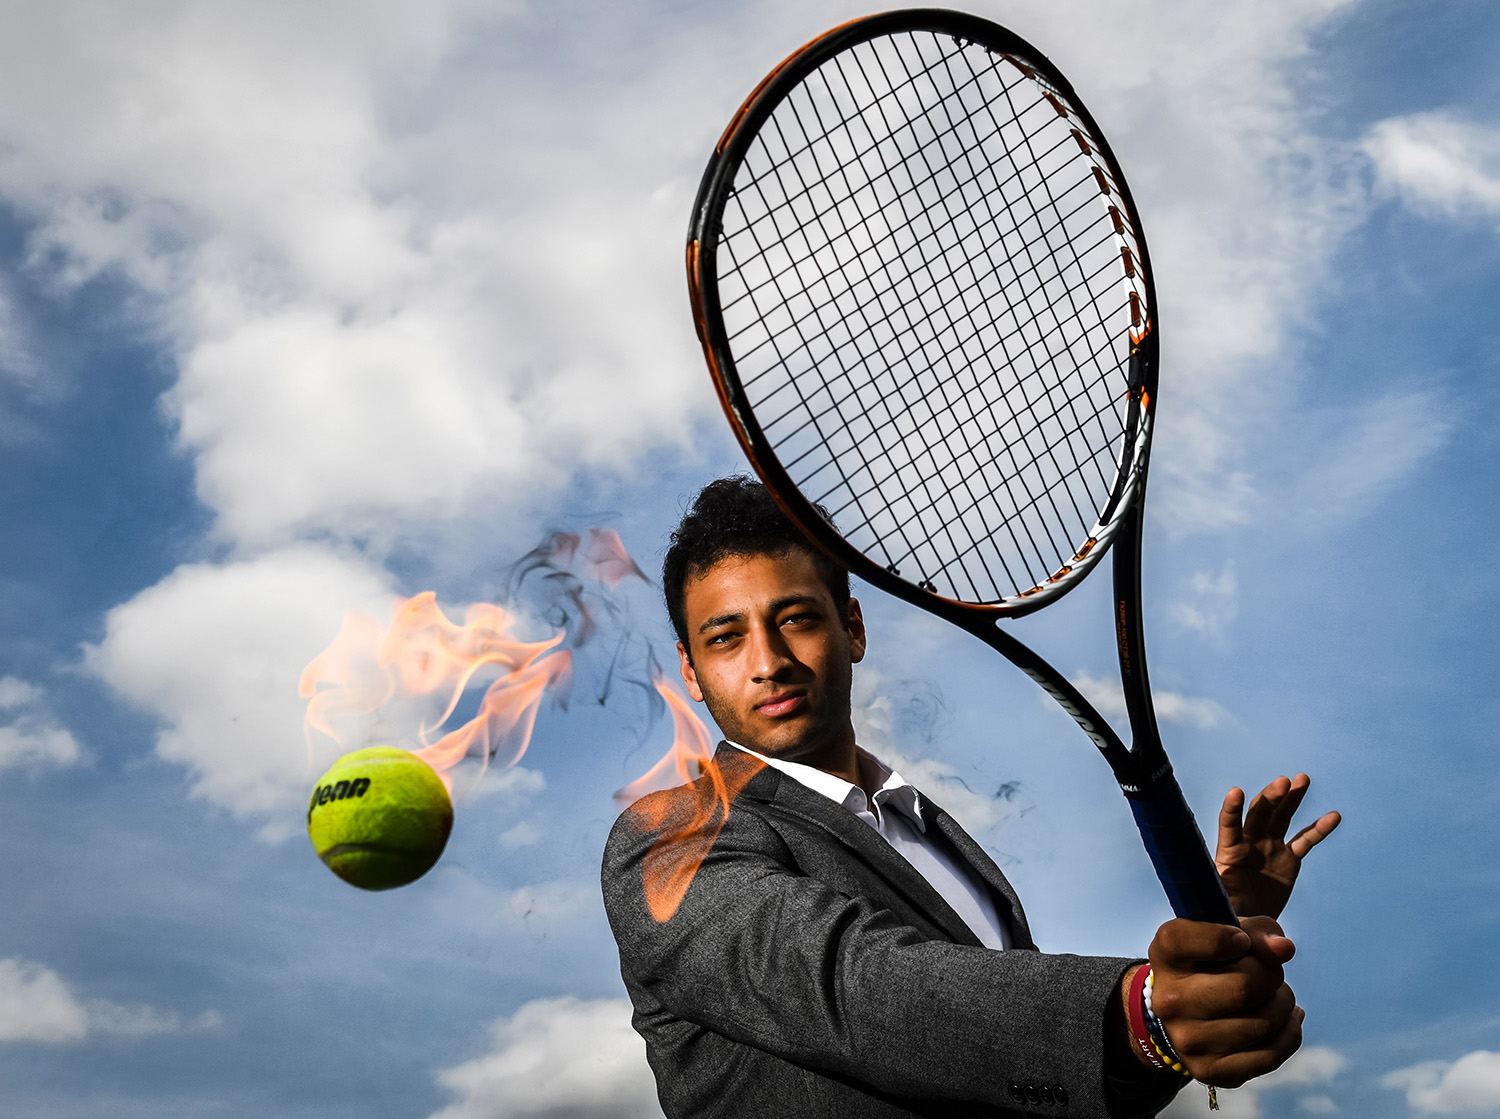 Moline’s Shaddy Khalafallah. The dapper senior tennis player finished ninth in No. 1 singles at the Tom Pitchford Invitational, also known as "mini-state", in Arlington Heights over the weekend. His only loss in the tournament was to top-seeded Jack Randall of Lockport, who won the tournament.  (Todd Mizener - Dispatch/Argus) 